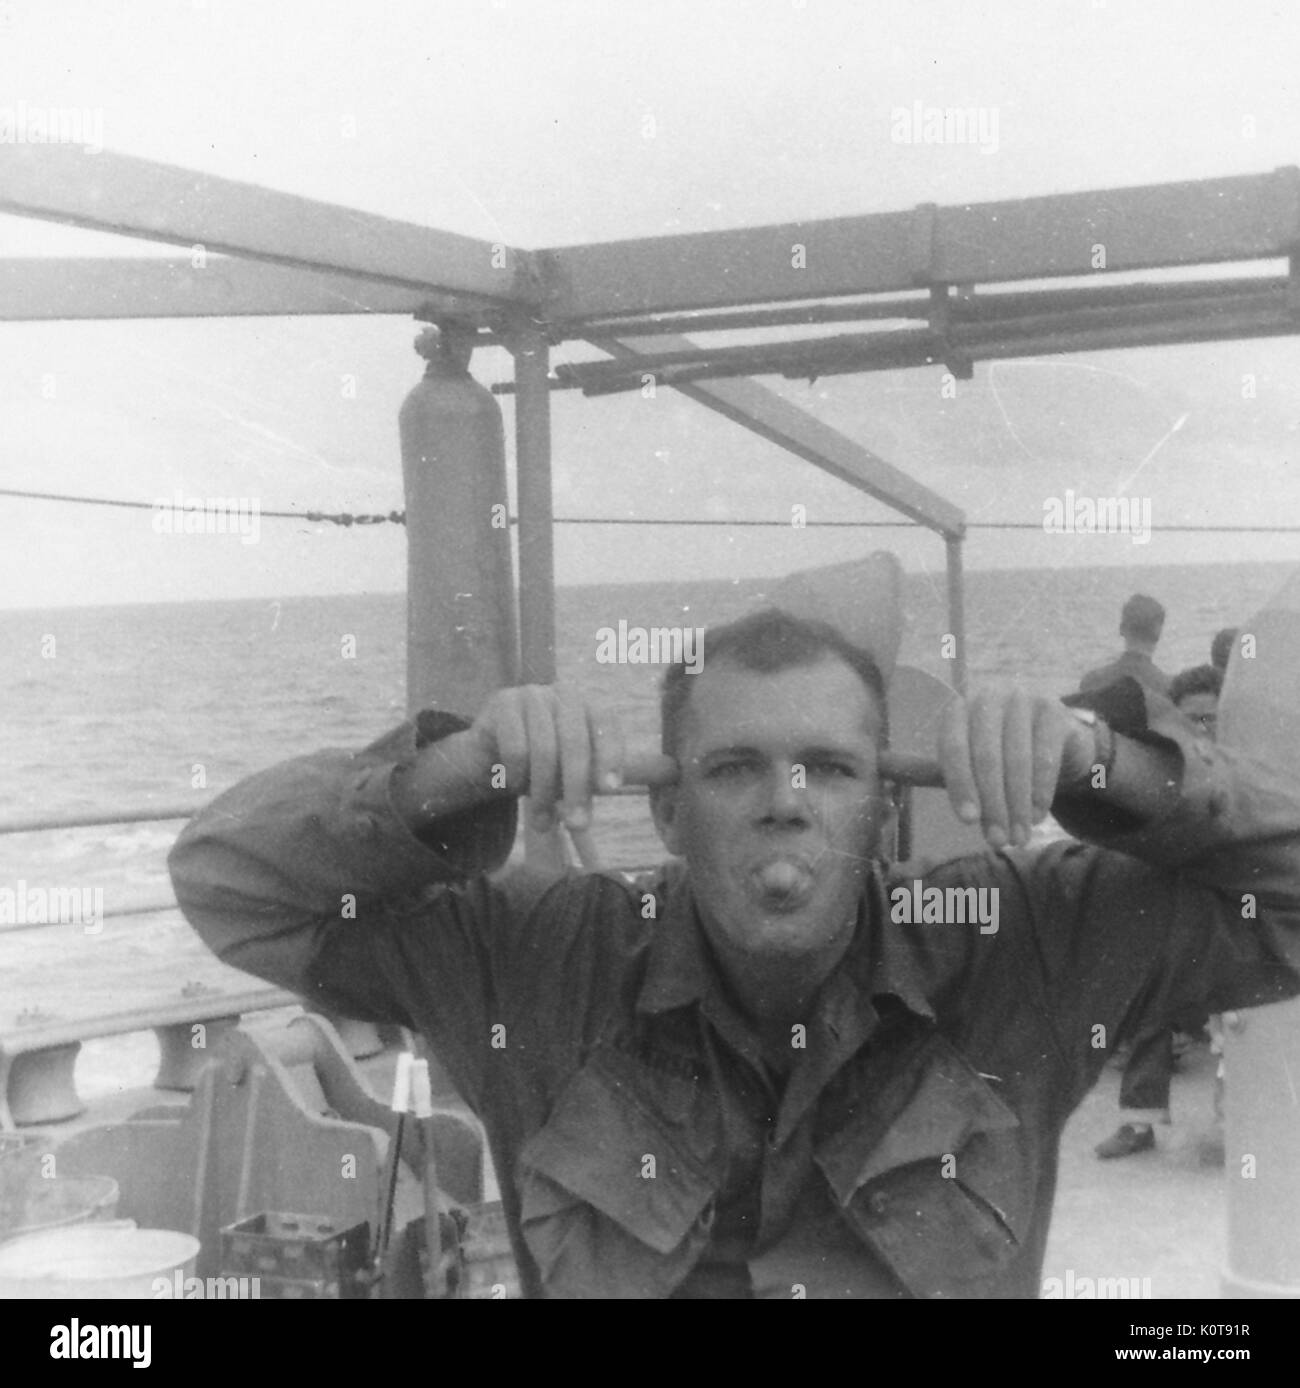 A United States soldier sticks his tongue out and makes a funny face while posing aboard a large ship, Vietnam, 1966. Stock Photo